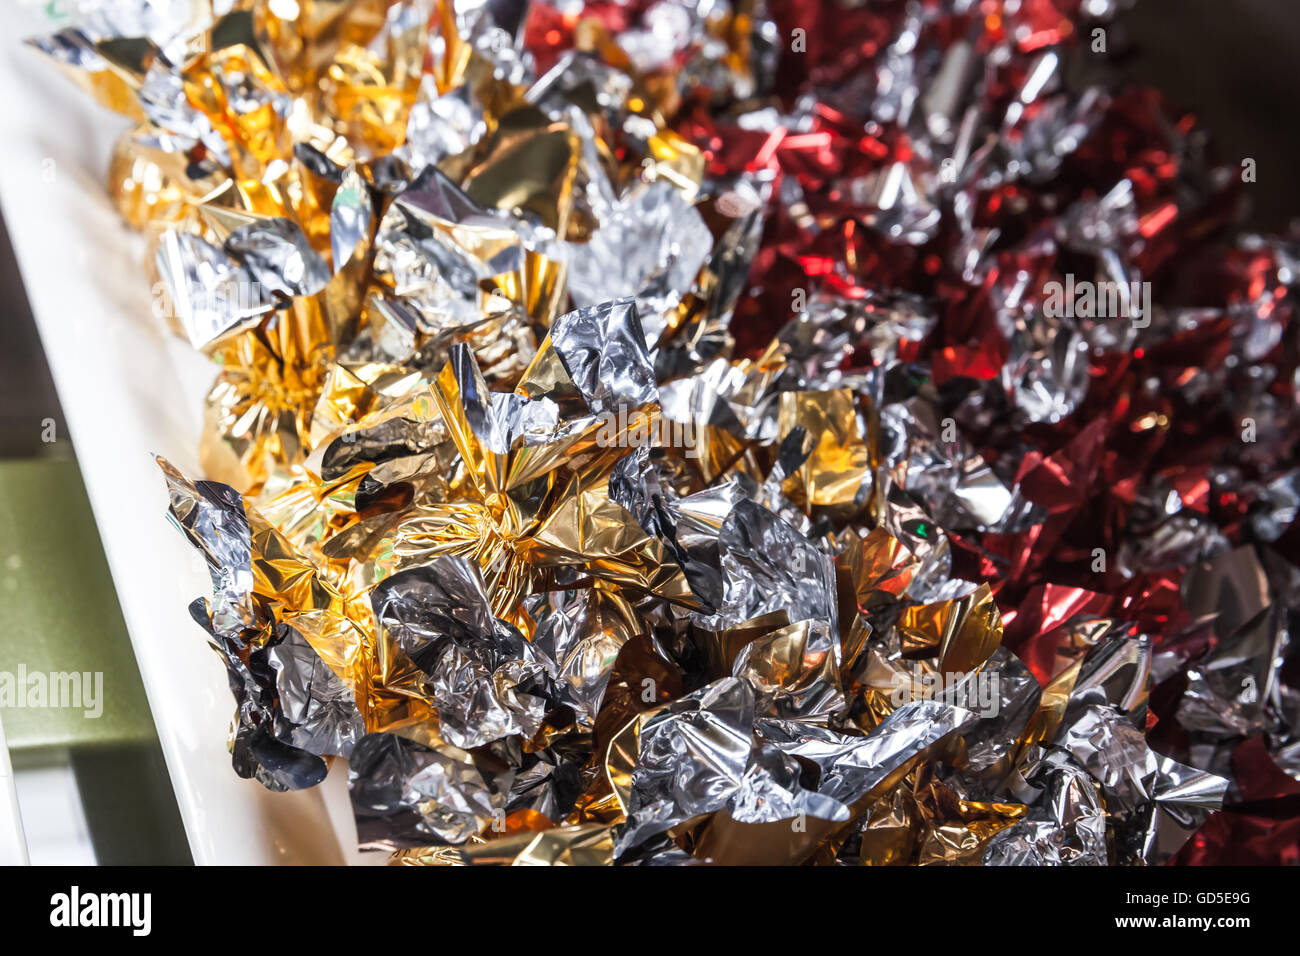 Candies in shining colorful wrappers lay on a market counter, close-up photo with selective focus Stock Photo